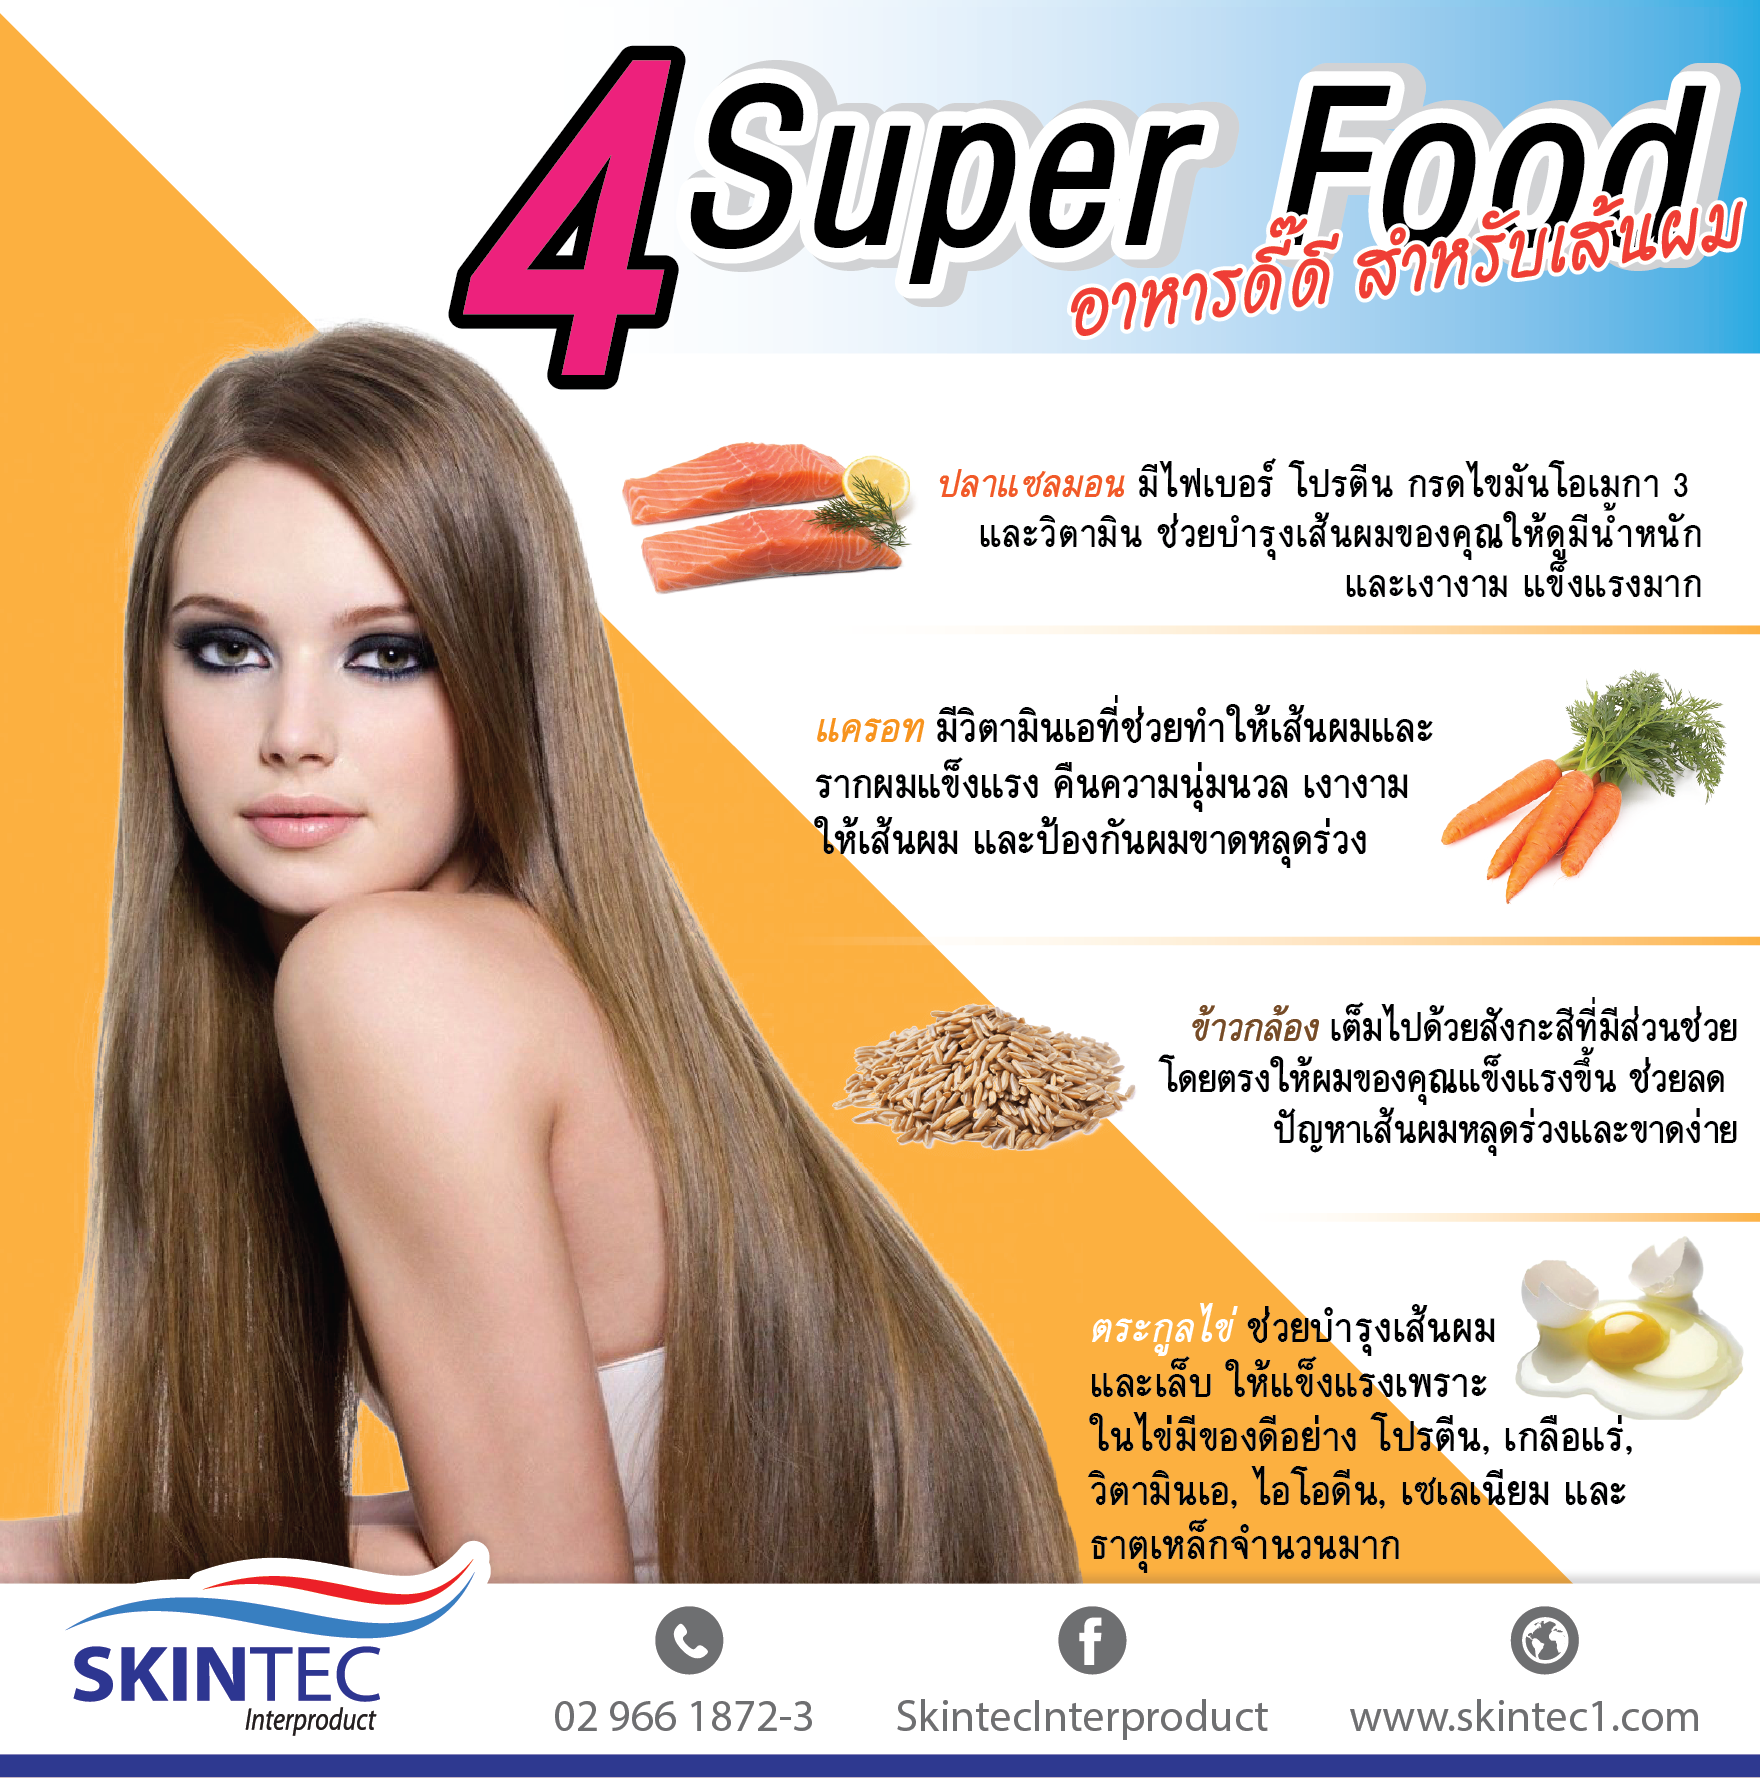 4 Super Food for Hair